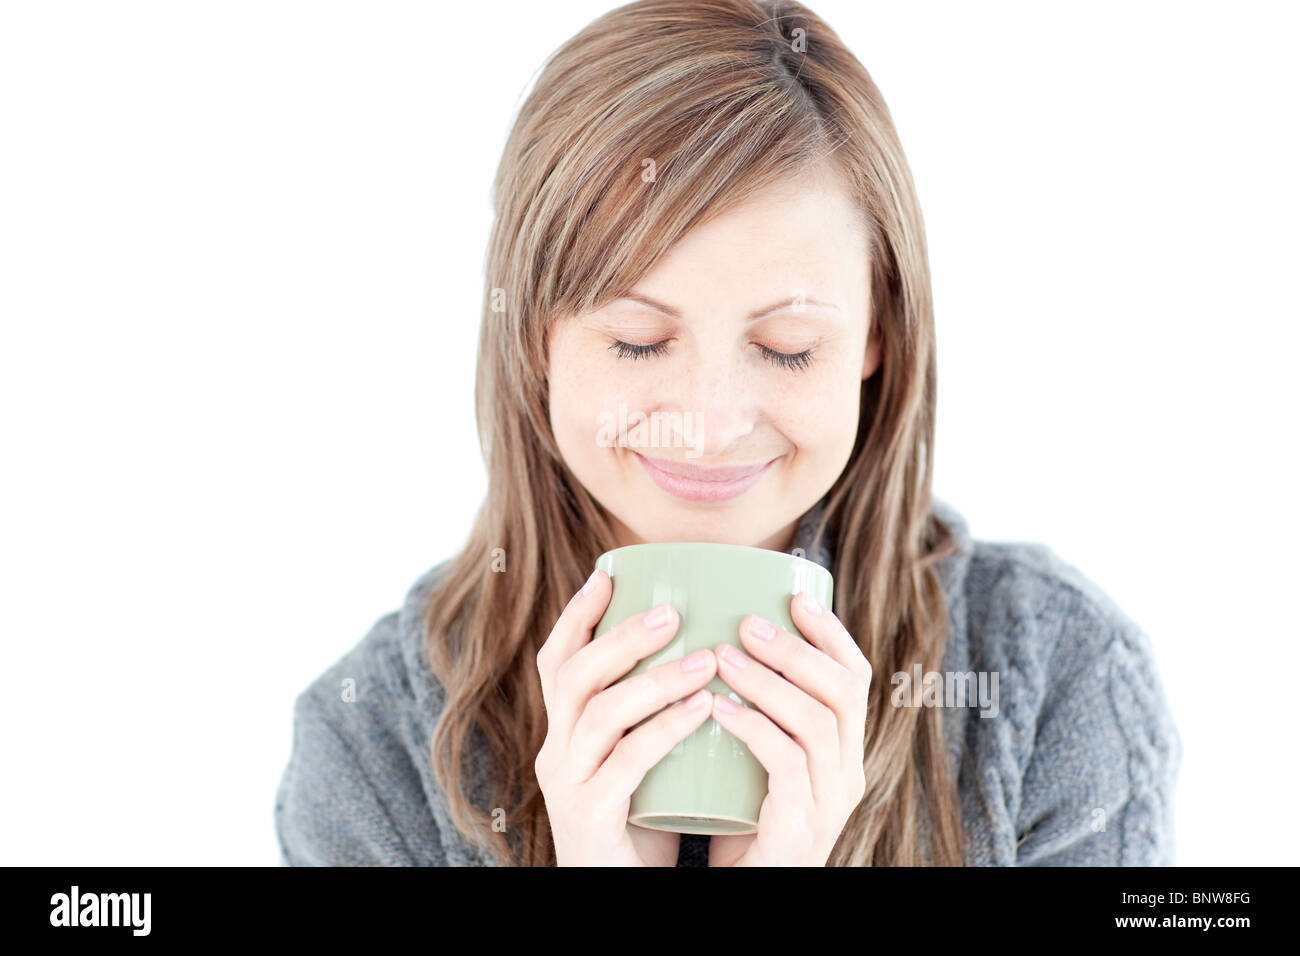 Smiling woman holding a cup a coffee Stock Photo